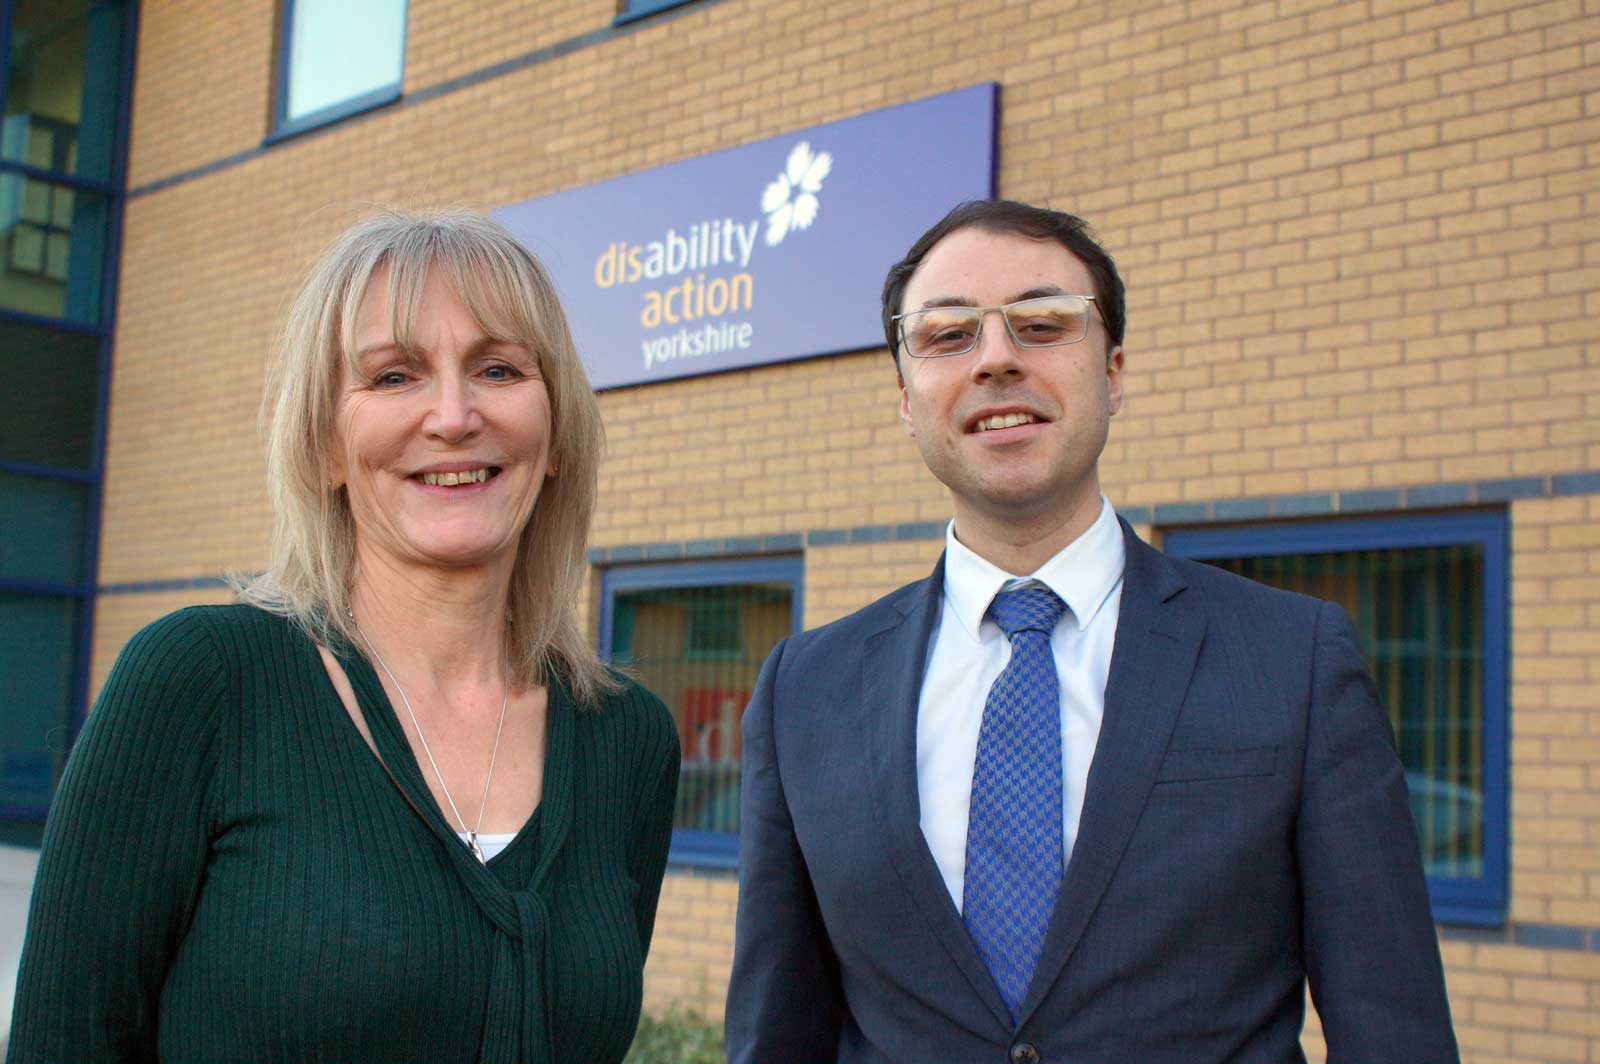 New Face At Disability Action Yorkshire! New Operations Manager David Ashton Jones with the organisation’s Chief Executive, Jackie Snape